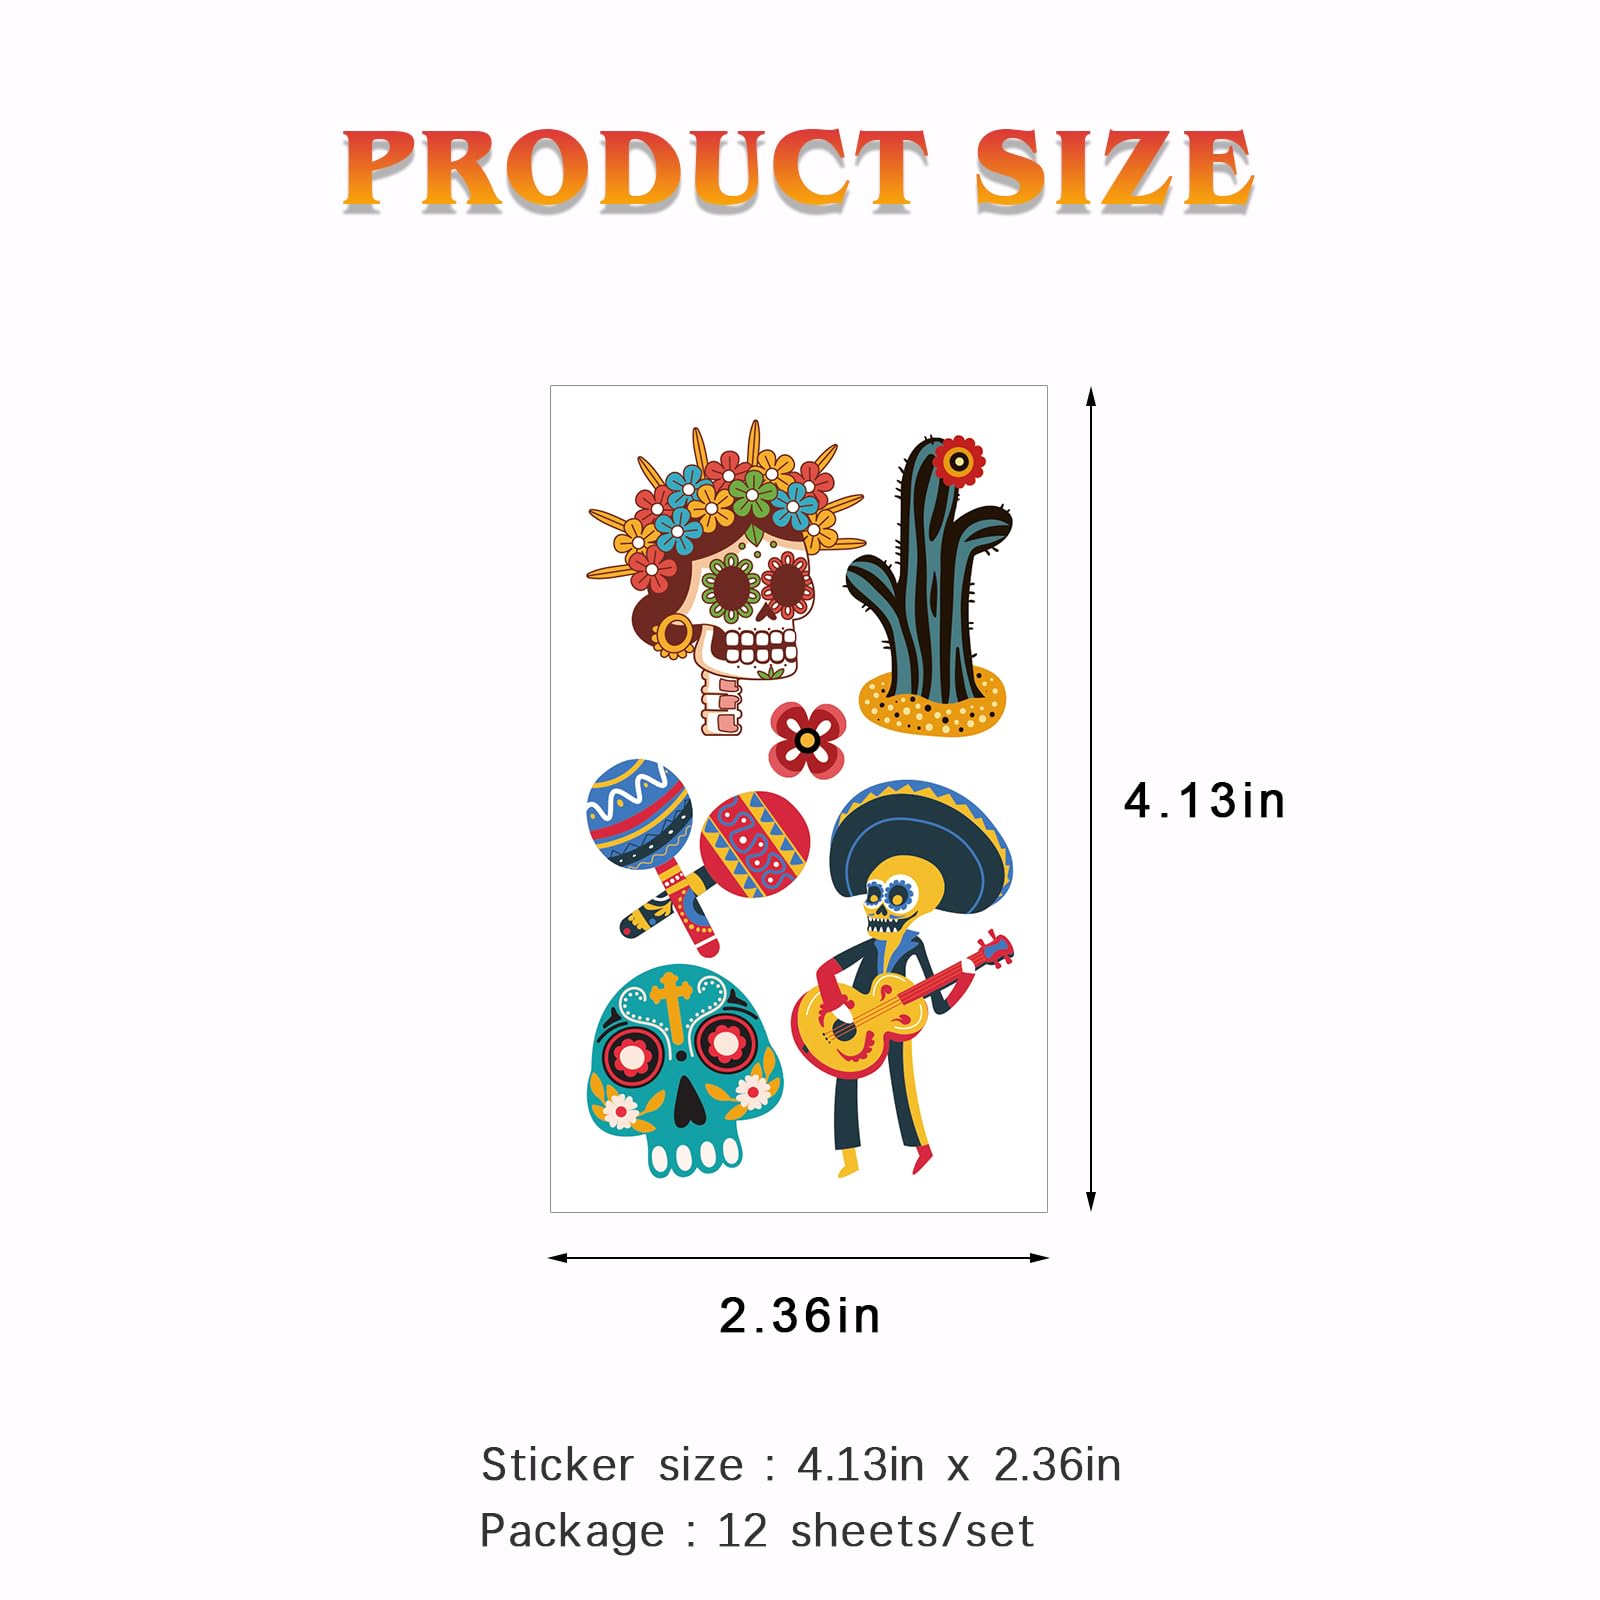 65 Pieces Mexican Day Of The Dead Temporary Tattoos for Kids, Sugar Skull Guitar Floral Skeleton Cactus Tattoo Stickers for Halloween Decorations Dia de Los Festival Carnival Party Favor Supplies